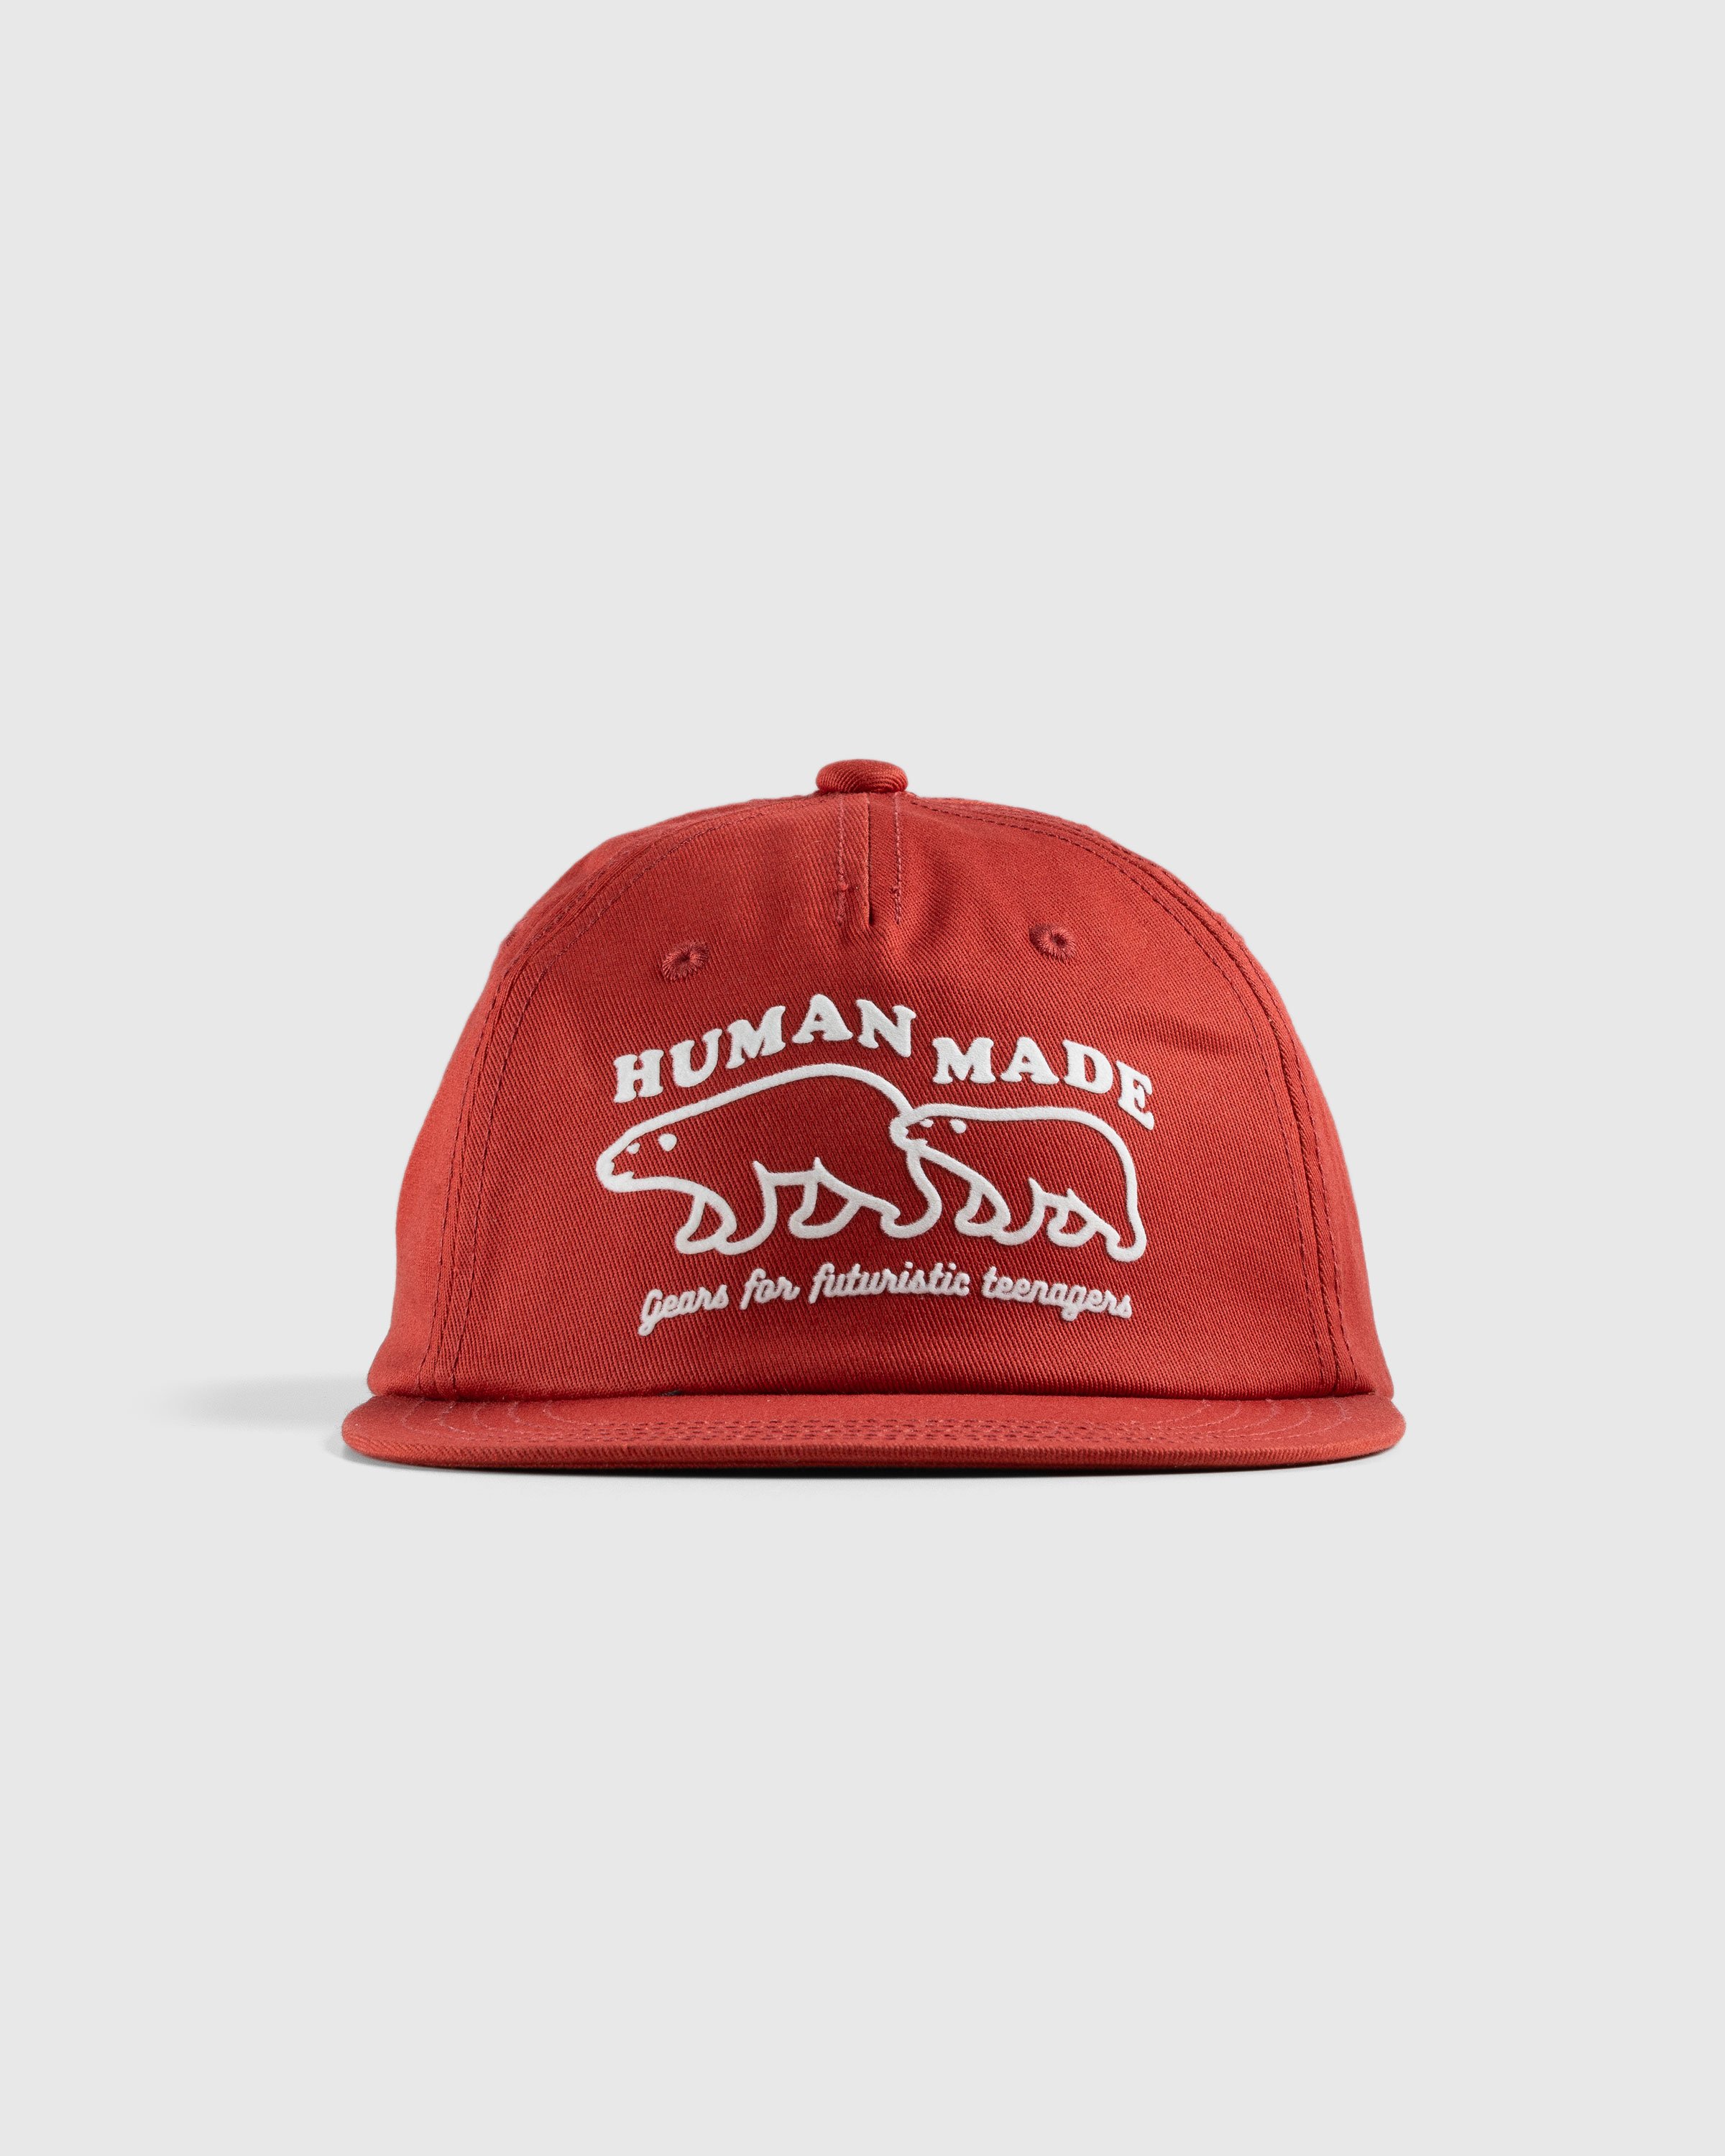 Human Made - 5 PANEL CAP #2 Red - Accessories - Red - Image 2